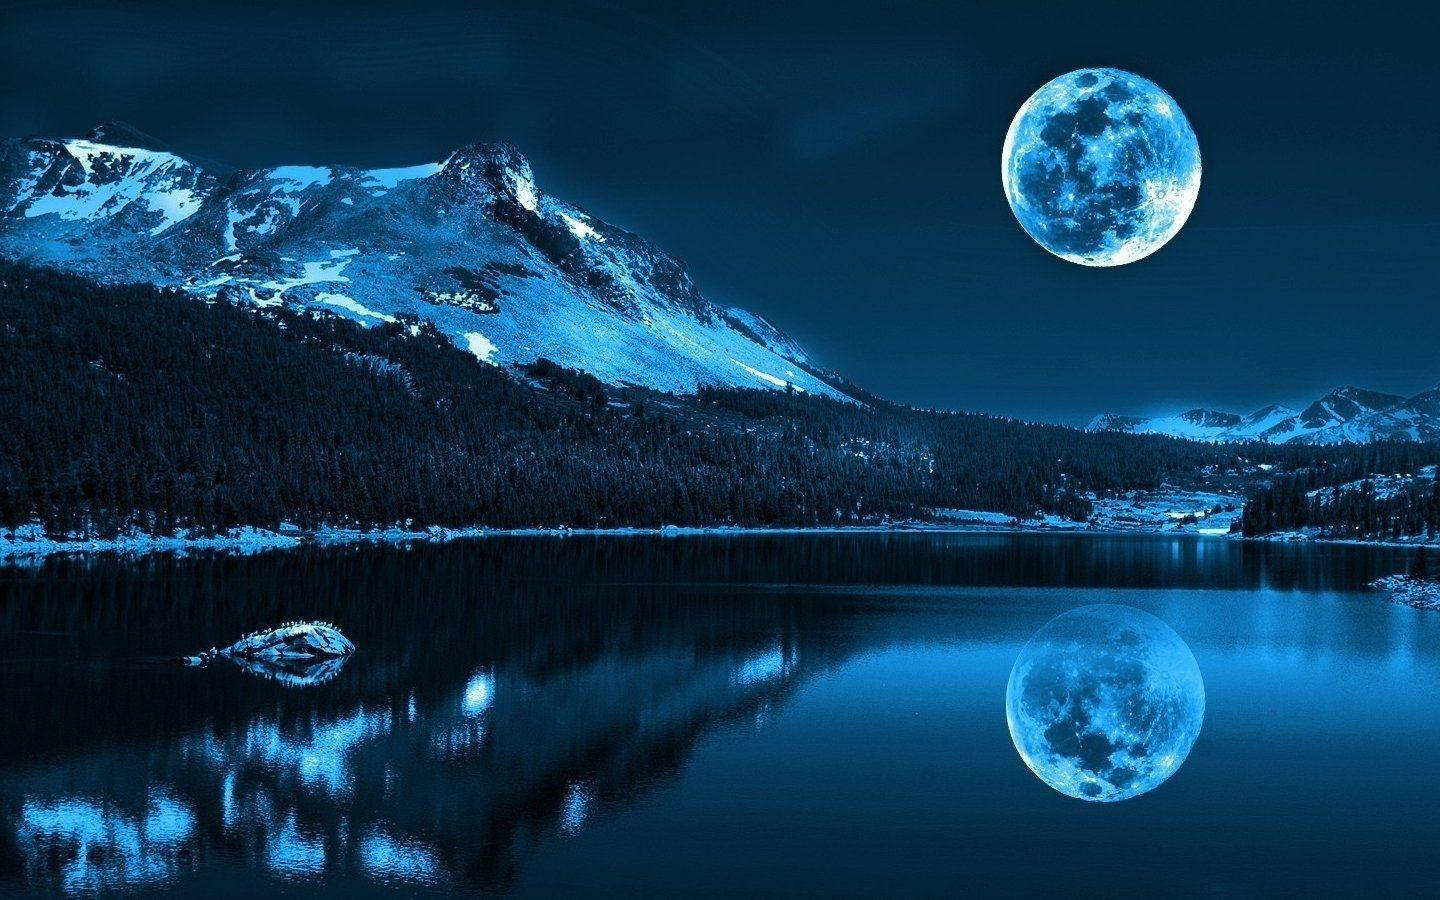 The moon over a lake with mountains in the background - Lake